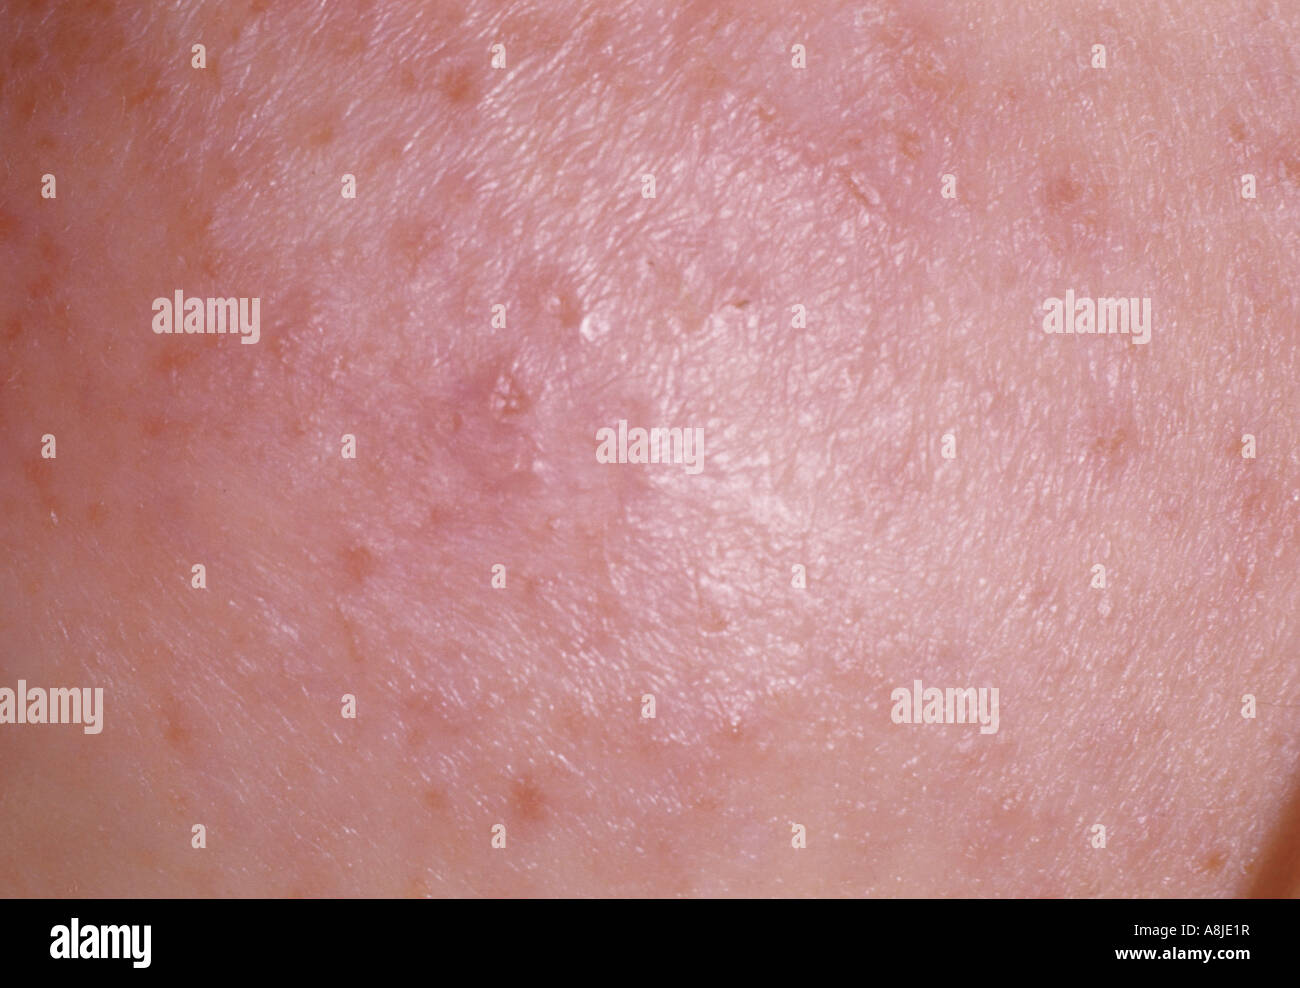 Close Up View Of Infantile Eczema On A Young Childs Face Also Known